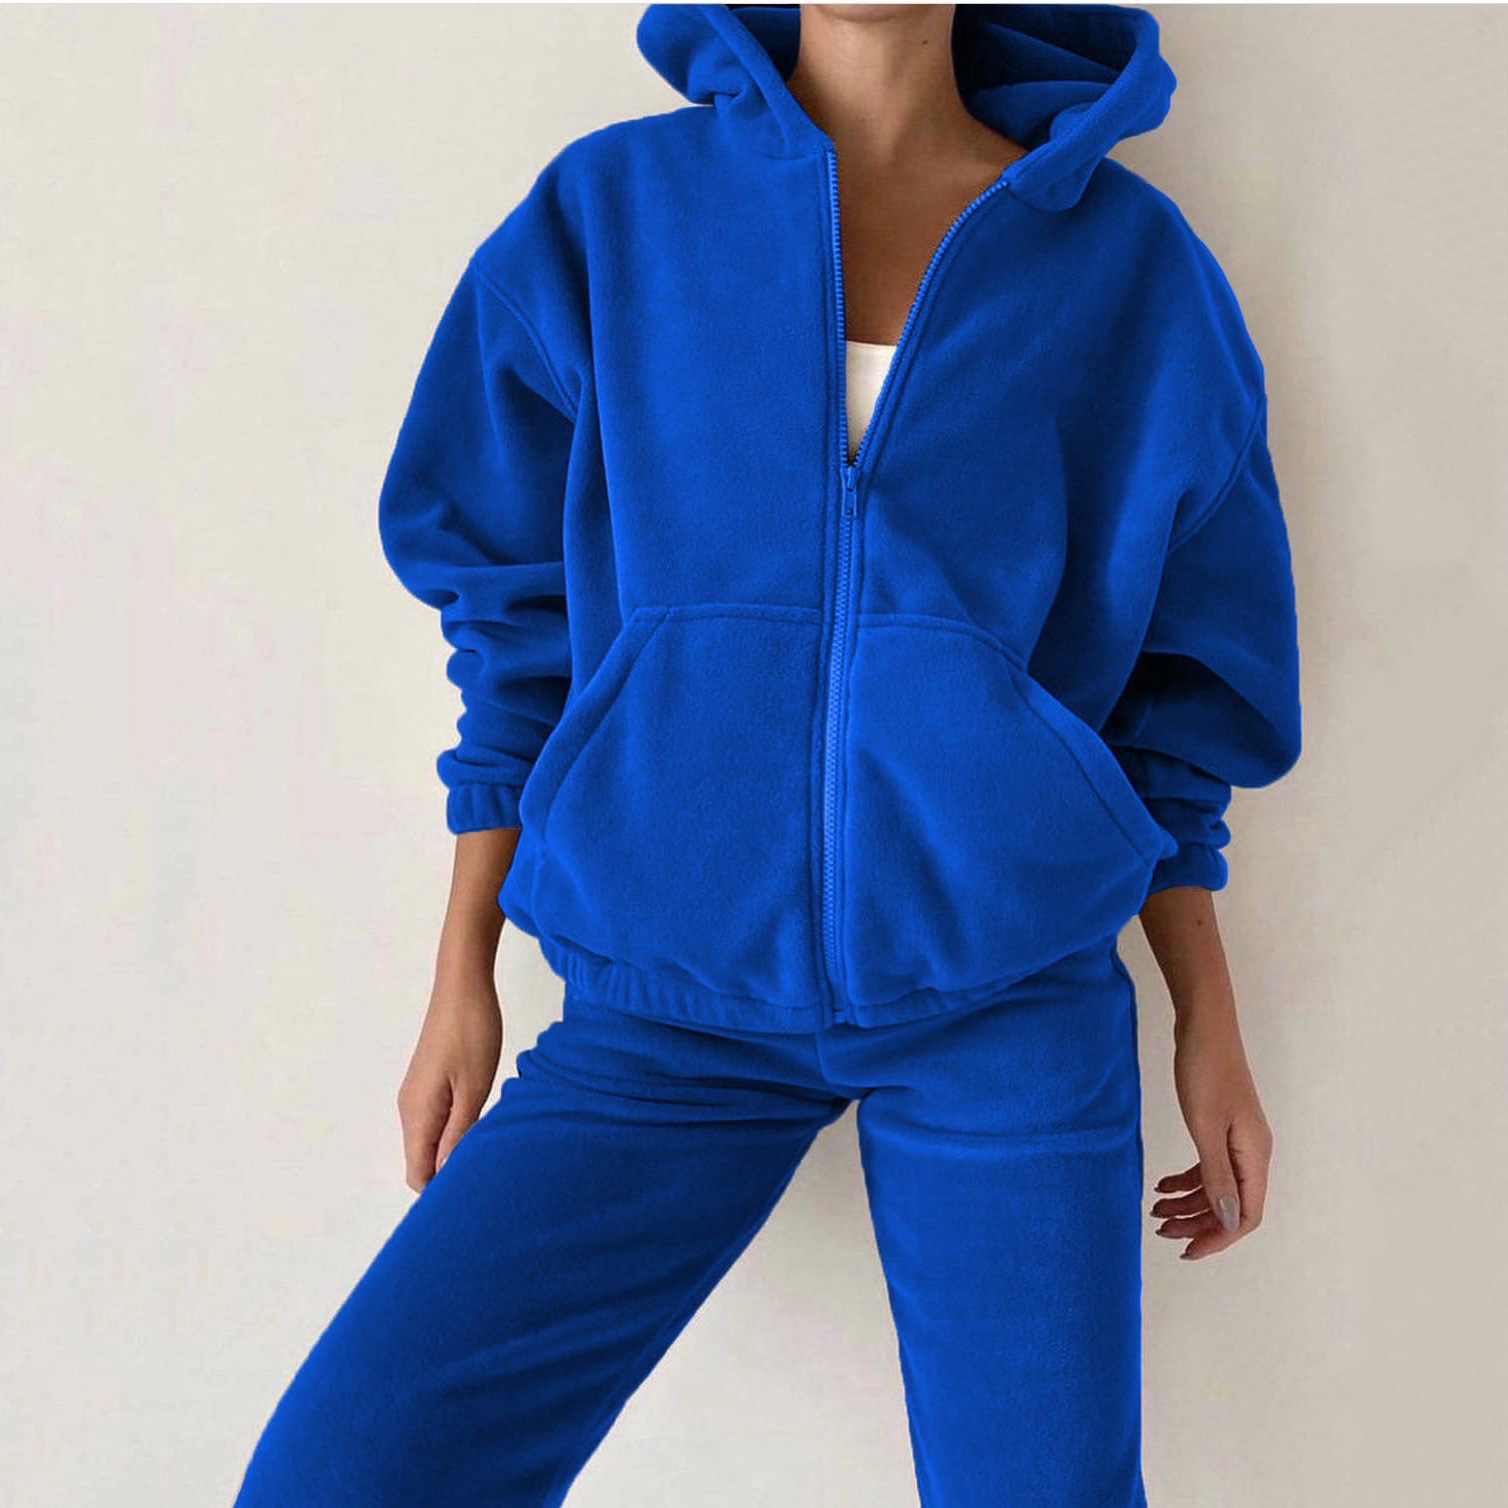 Rotimia Sports And Leisure Sweater Suit